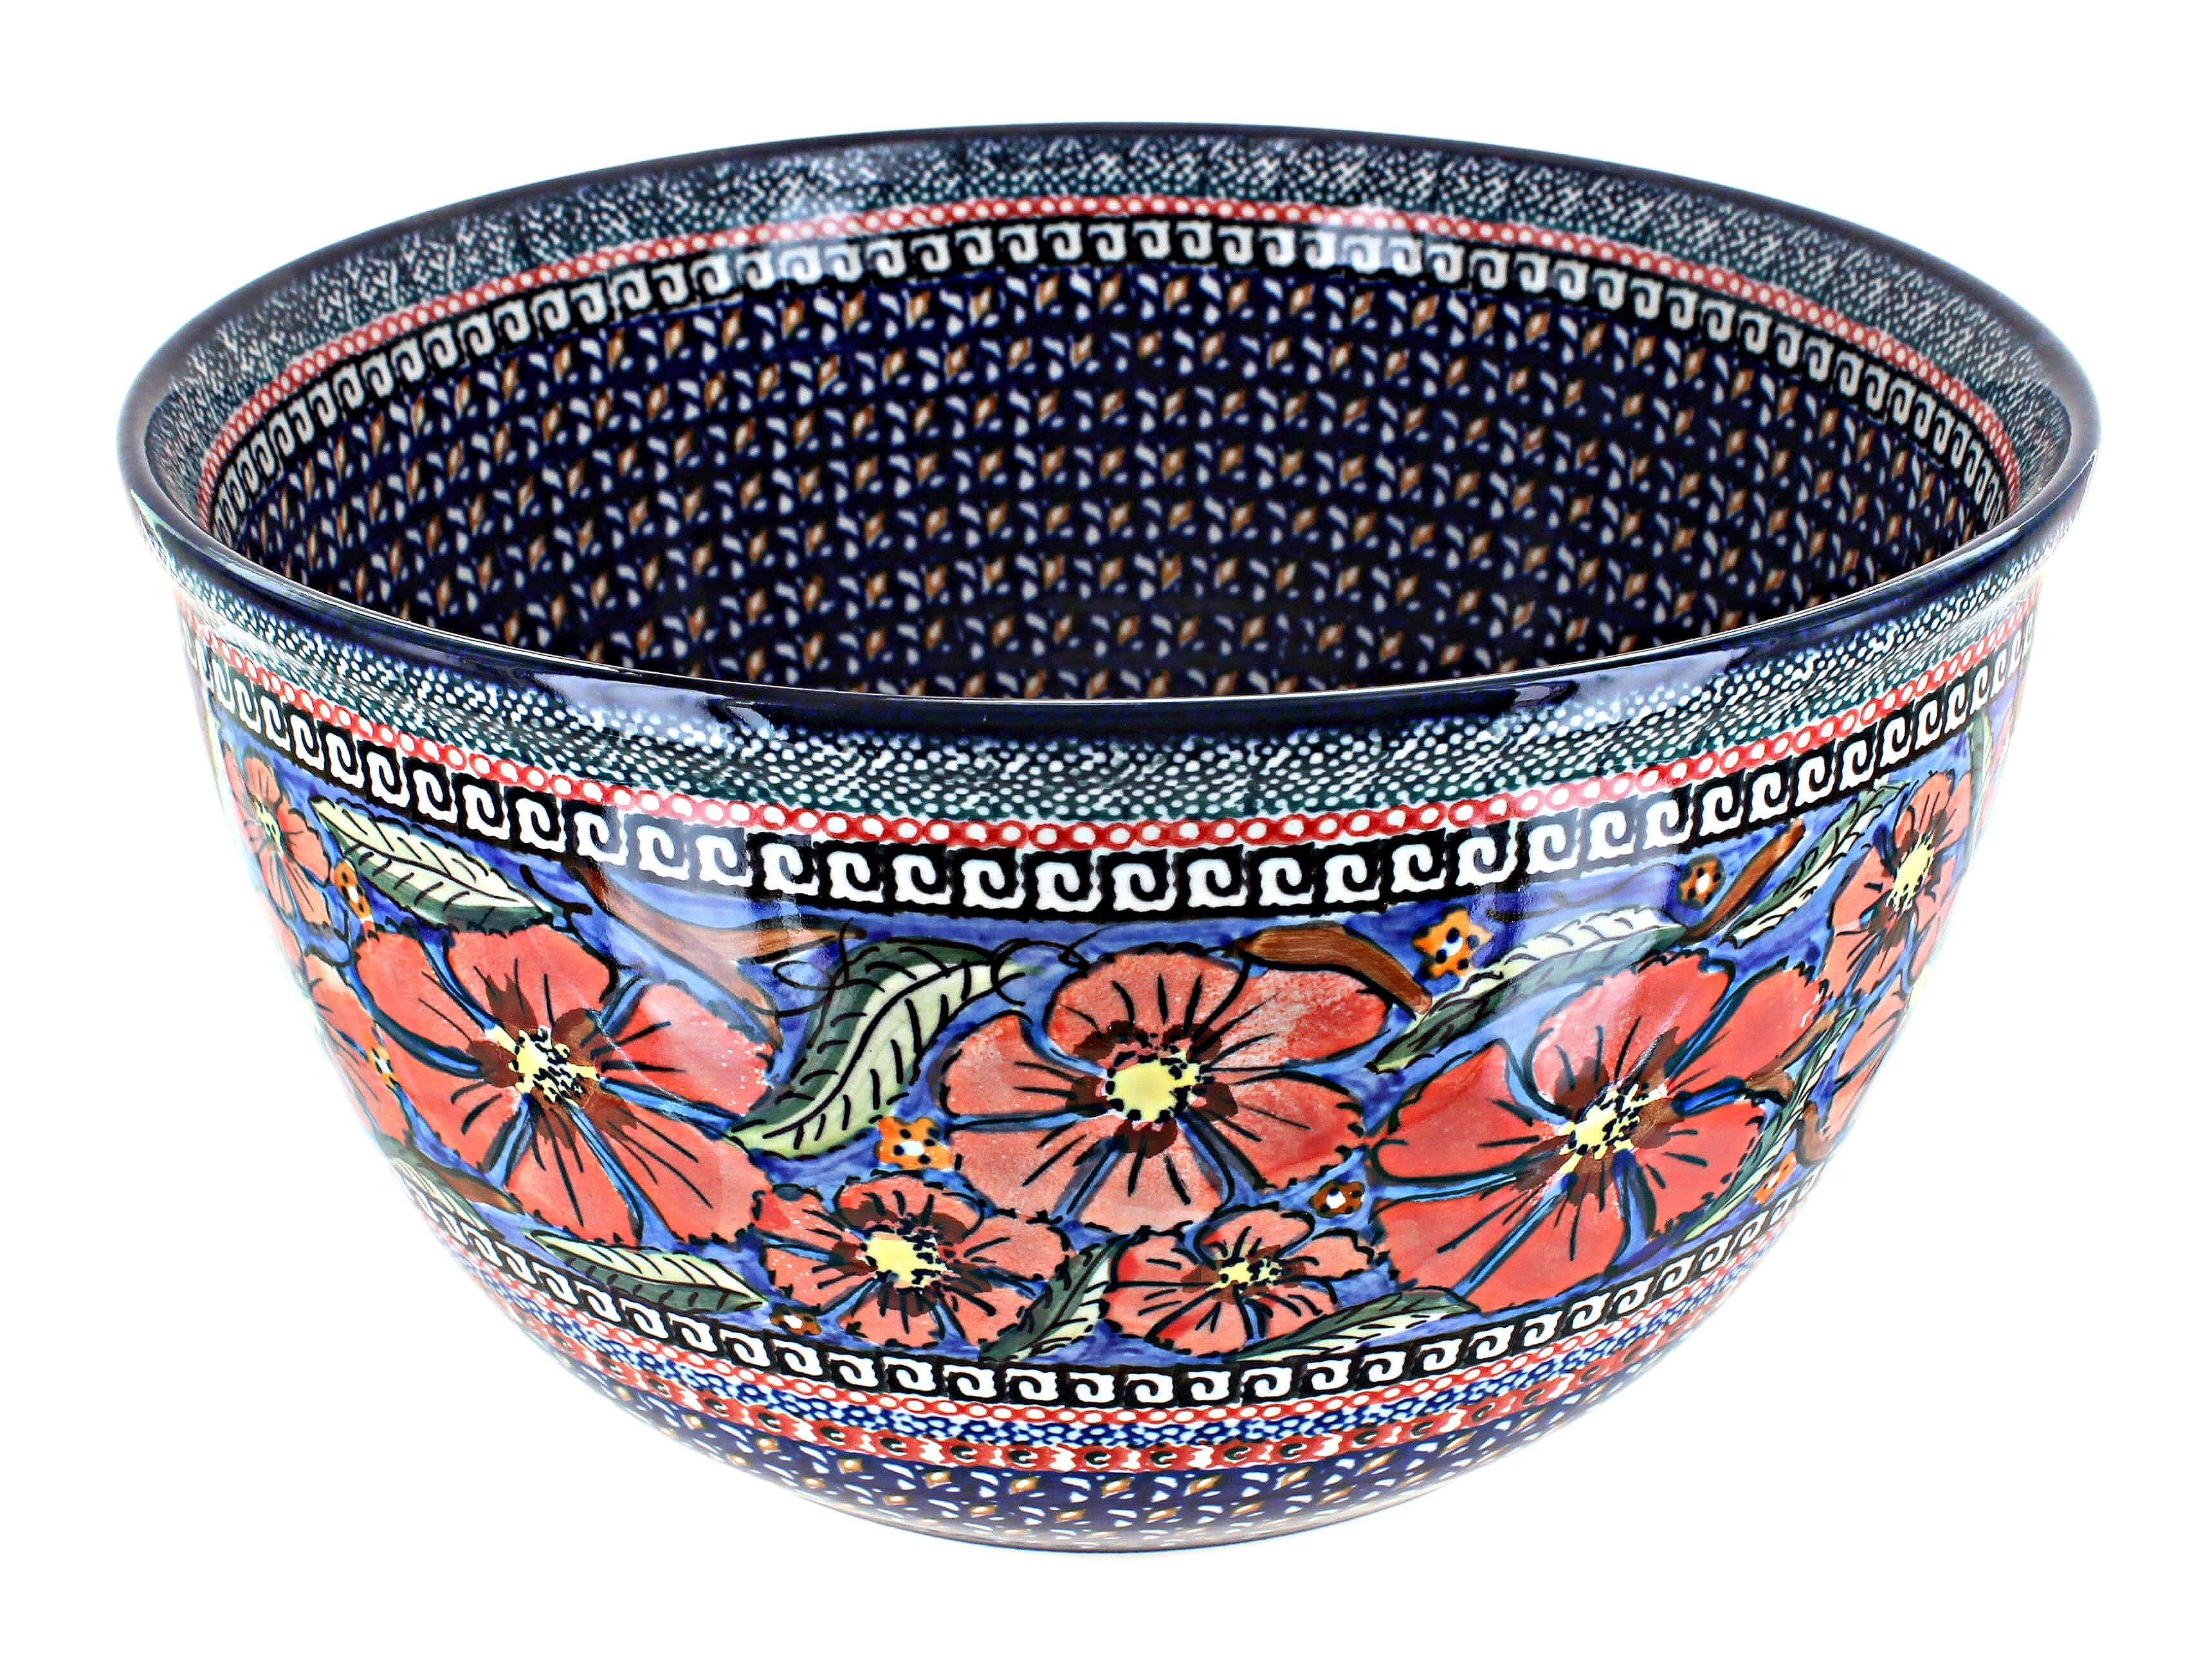 Polish Pottery - Muffin Pan - Summer Blossoms - The Polish Pottery Outlet